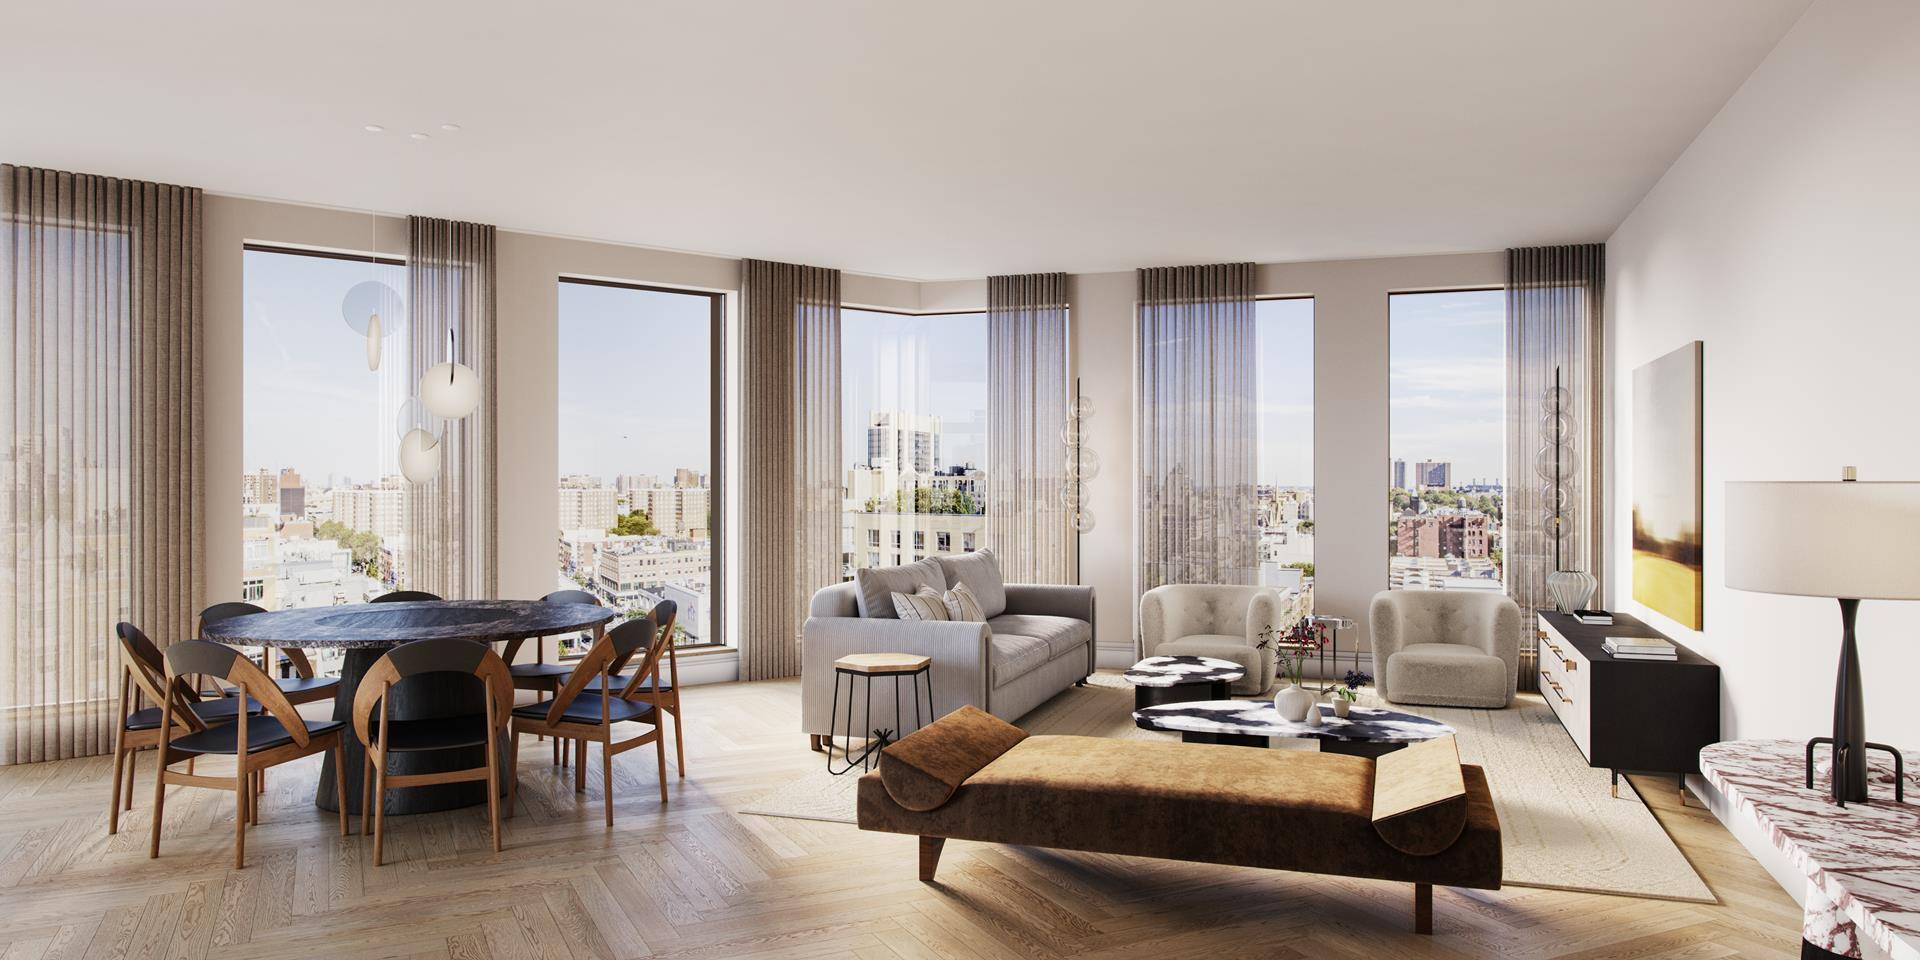 Sales Gallery Now Open By Appointment Introducing residence 8G at 300 West, a 1, 000 square foot eastern facing two bedroom, two bathroom, offering an extensive living dining space that ...